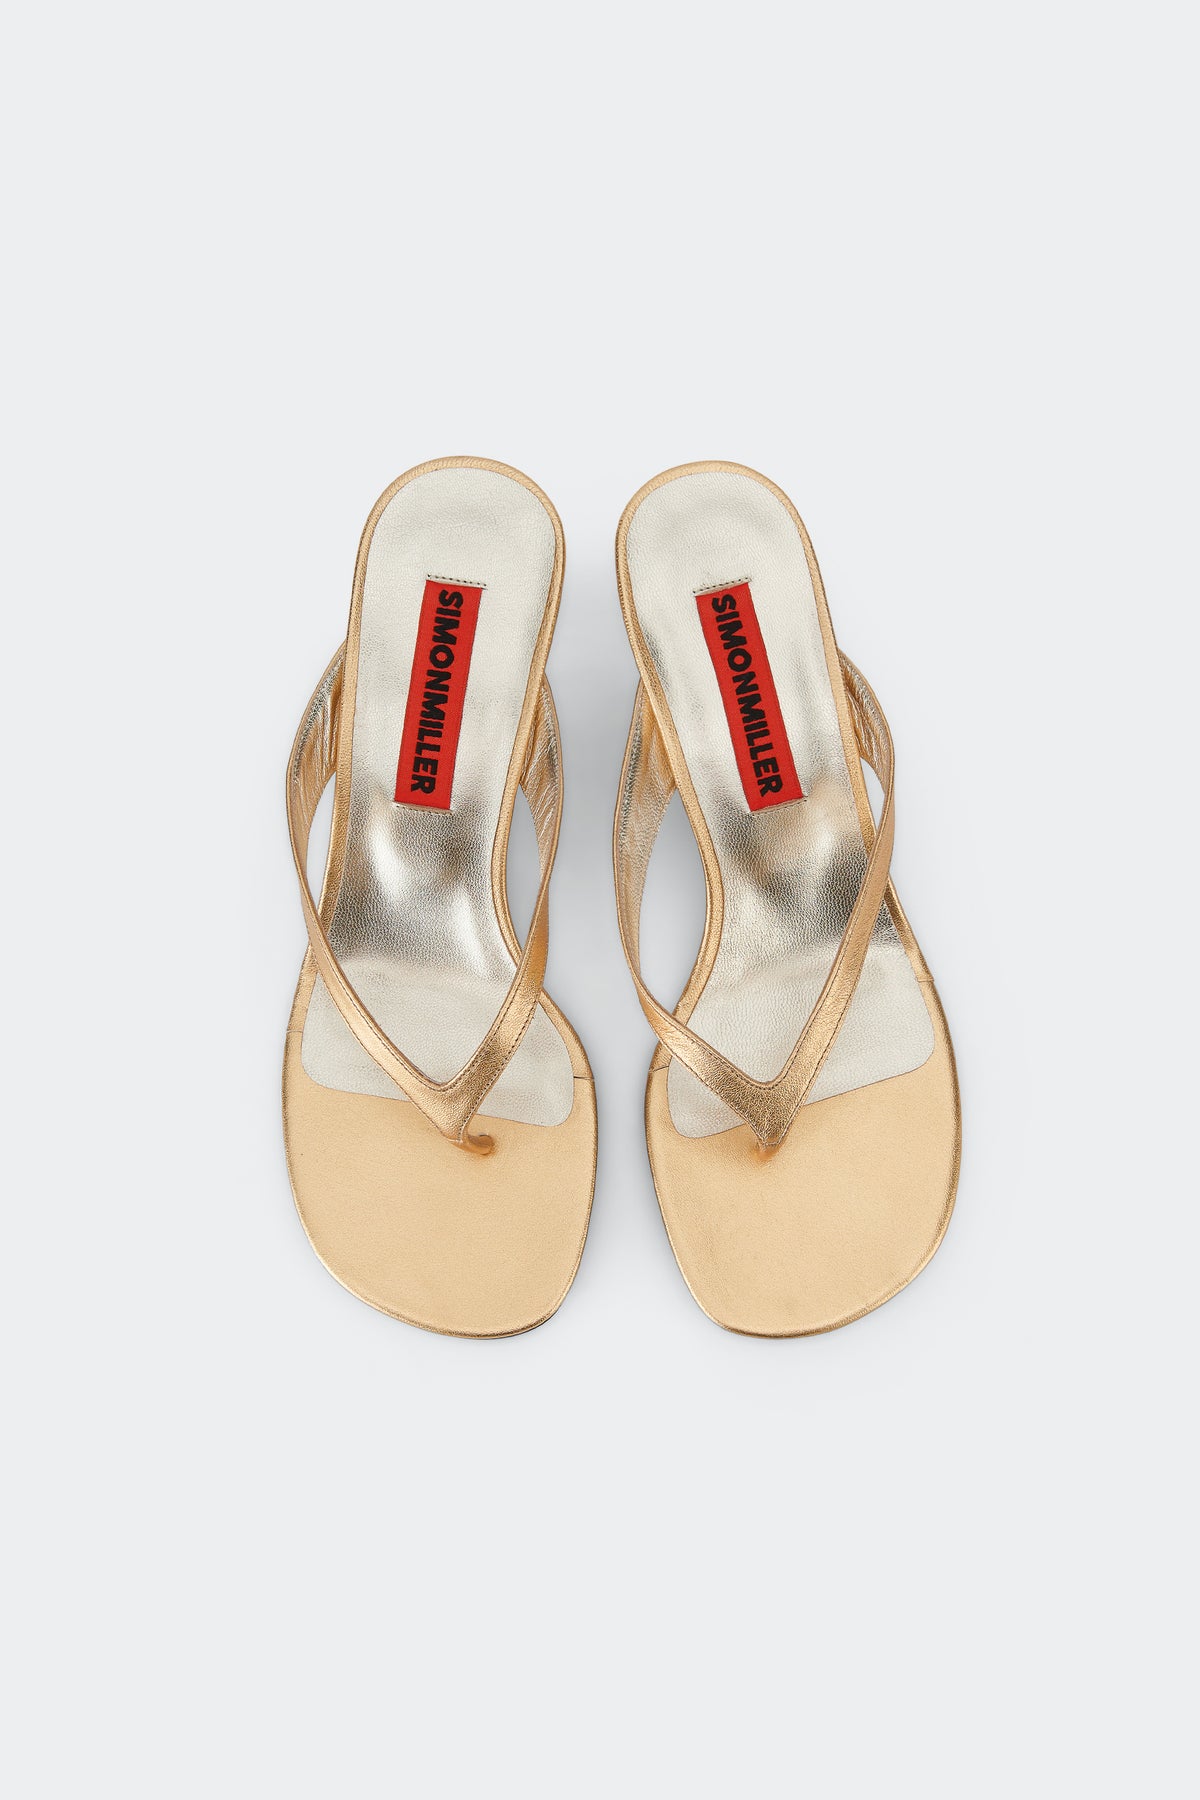 Beep Thong Sandal in Star Gold